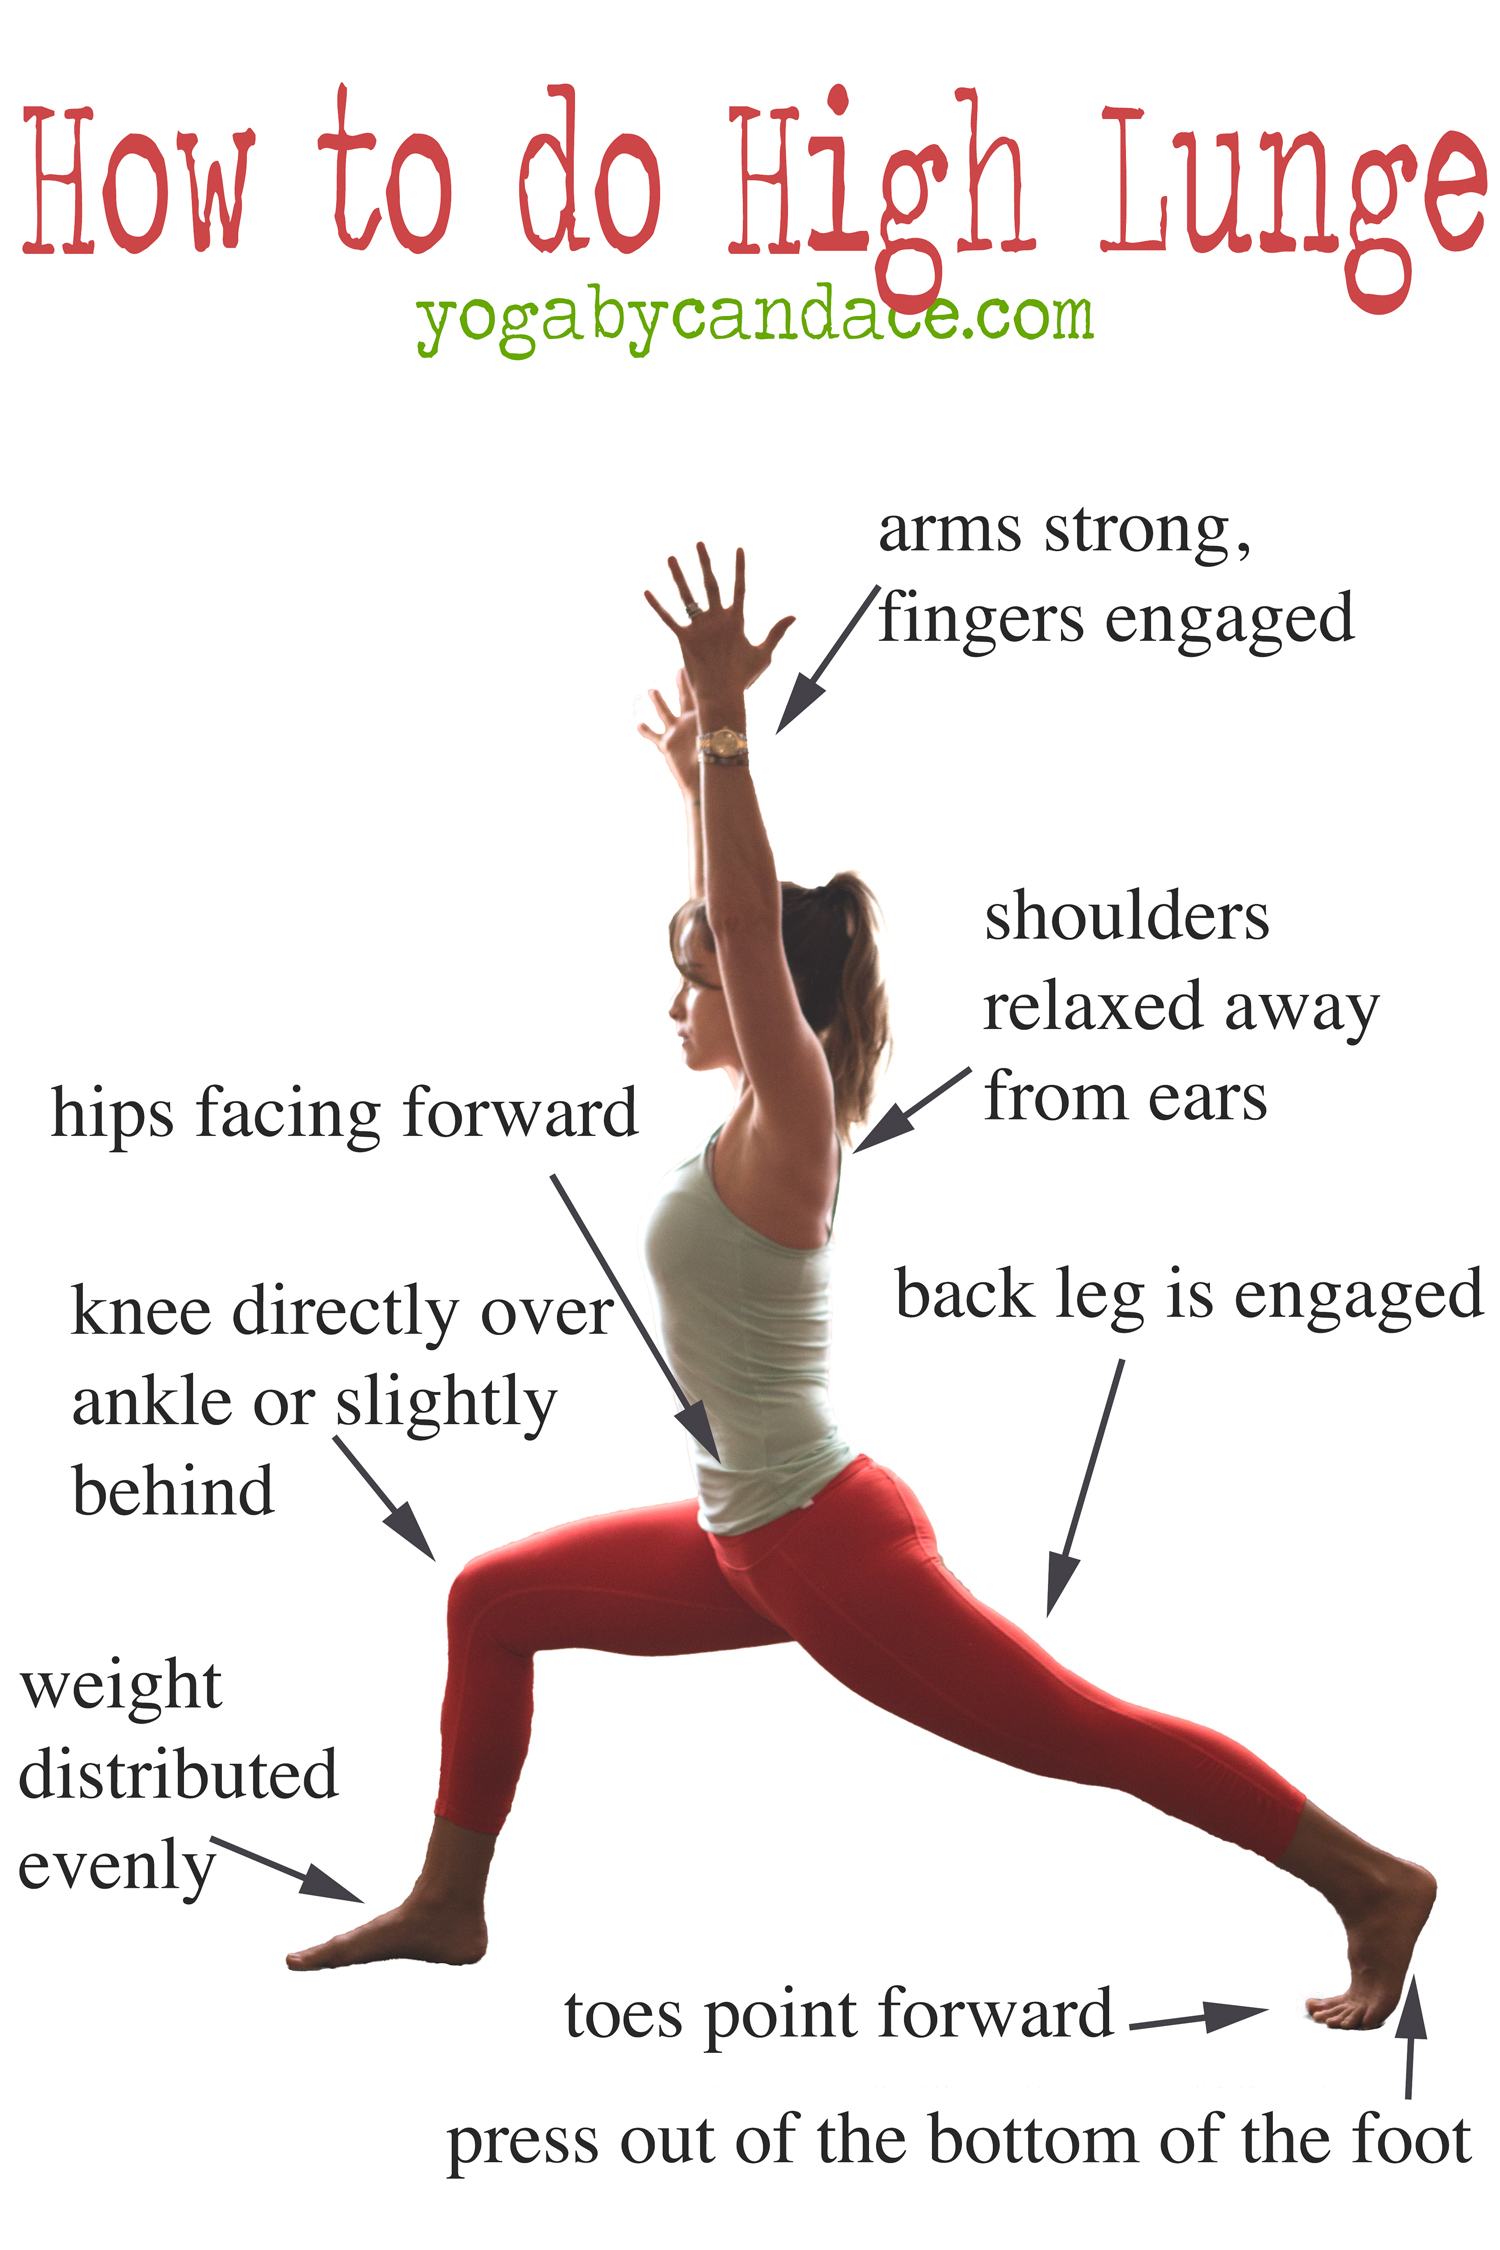 How to do High Lunge — YOGABYCANDACE